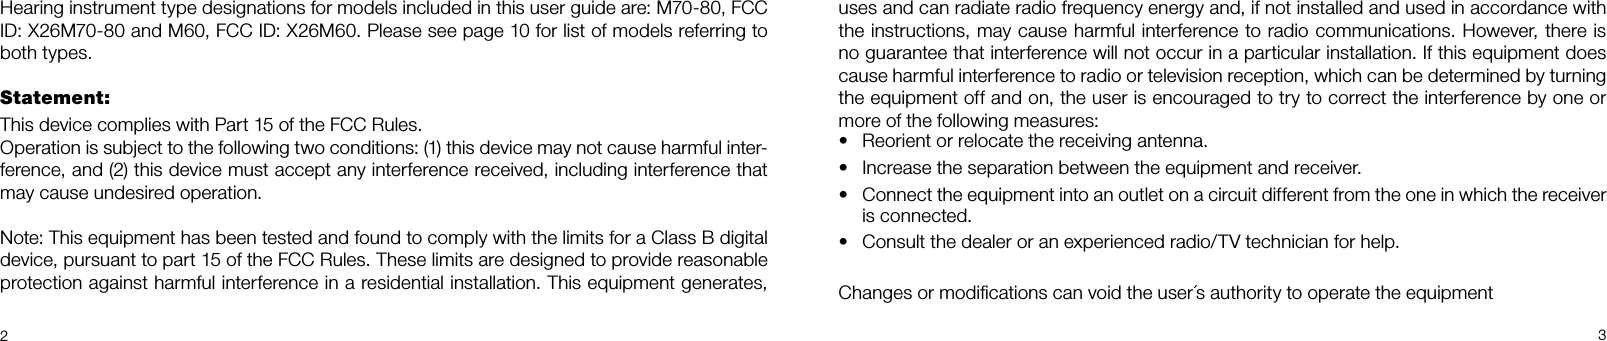 23uses and can radiate radio frequency energy and, if not installed and used in accordance with the instructions, may cause harmful interference to radio communications. However, there is no guarantee that interference will not occur in a particular installation. If this equipment does cause harmful interference to radio or television reception, which can be determined by turning the equipment off and on, the user is encouraged to try to correct the interference by one or more of the following measures:Reorient or relocate the receiving antenna.•Increase the separation between the equipment and receiver.•Connect the equipment into an outlet on a circuit different from the one in which the receiver •is connected.Consult the dealer or an experienced radio/TV technician for help.•Changes or modiﬁcations can void the user´s authority to operate the equipmentHearing instrument type designations for models included in this user guide are: M70-80, FCC ID: X26M70-80 and M60, FCC ID: X26M60. Please see page 10 for list of models referring to both types.Statement:This device complies with Part 15 of the FCC Rules.Operation is subject to the following two conditions: (1) this device may not cause harmful inter-ference, and (2) this device must accept any interference received, including interference that may cause undesired operation.Note: This equipment has been tested and found to comply with the limits for a Class B digital  device, pursuant to part 15 of the FCC Rules. These limits are designed to provide reasonable  protection against harmful interference in a residential installation. This equipment generates, 